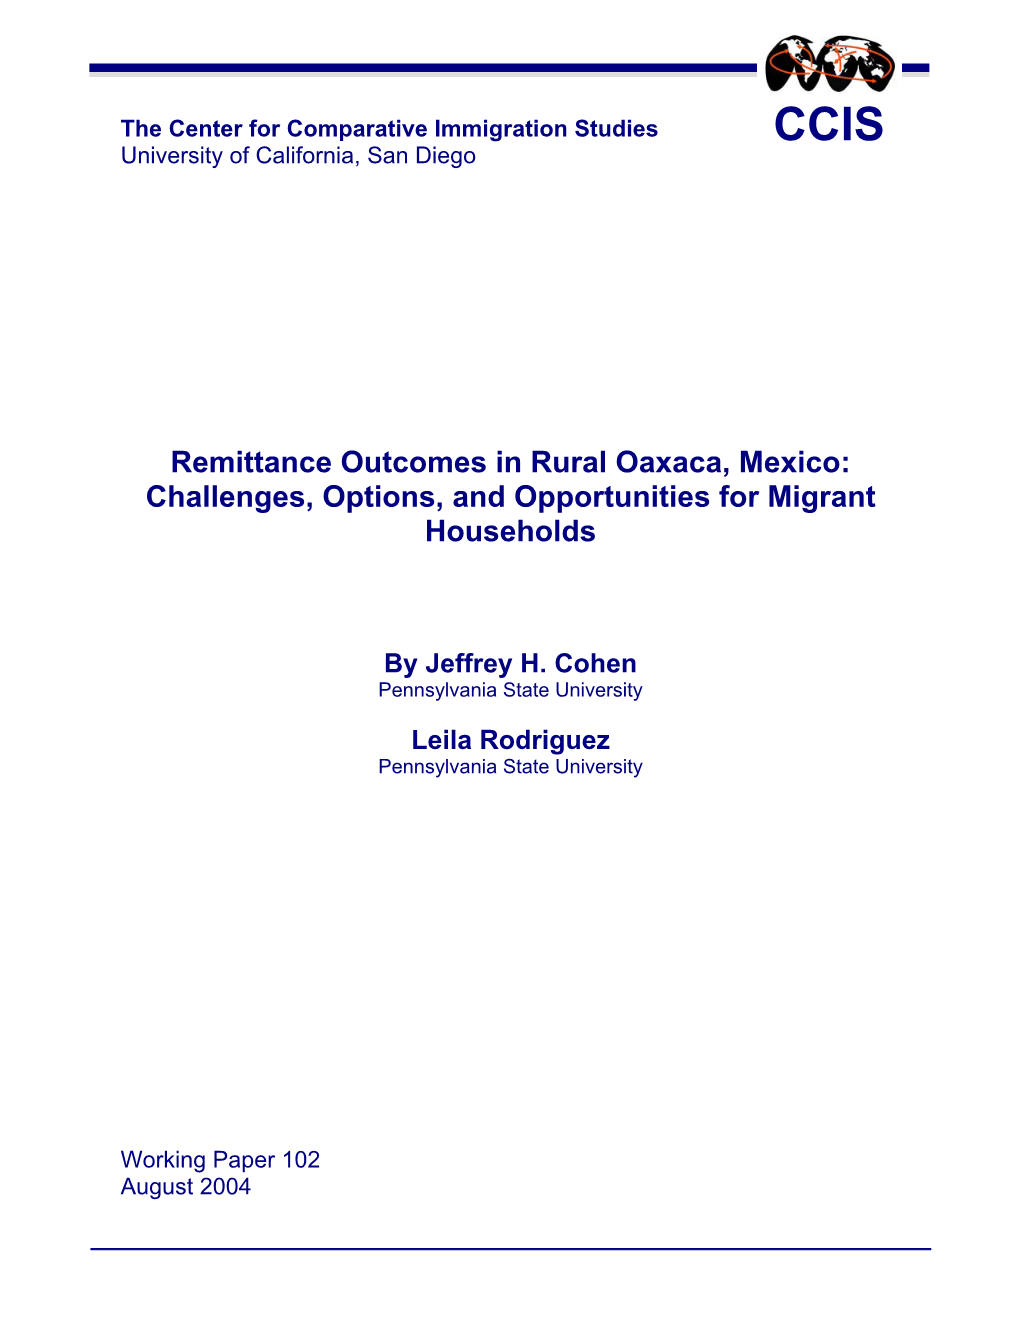 Remittance Outcomes in Rural Oaxaca, Mexico: Challenges, Options, and Opportunities for Migrant Households